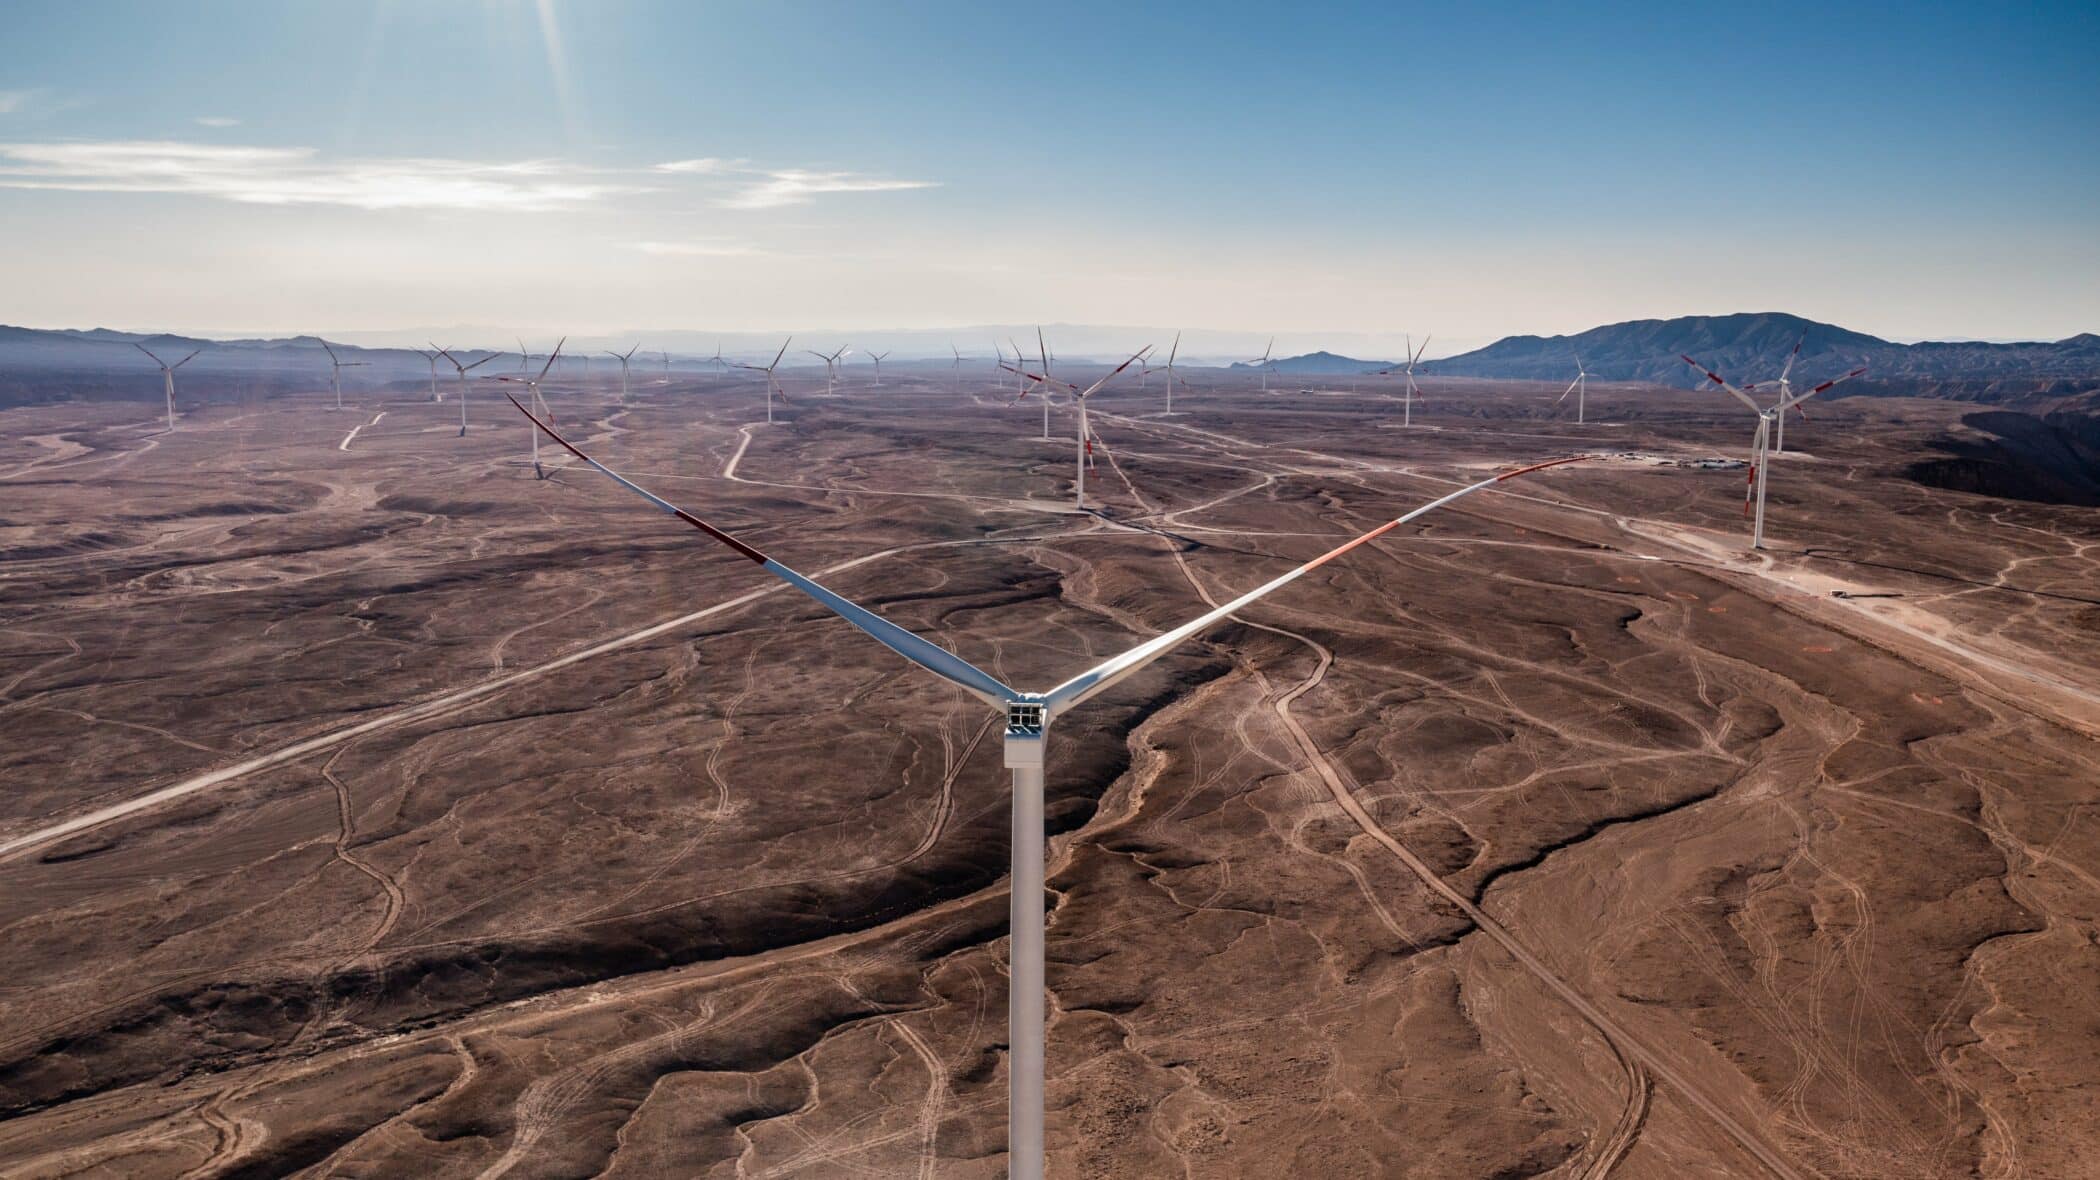 image of an onshore wind farm in Chilean desert with mountains in background